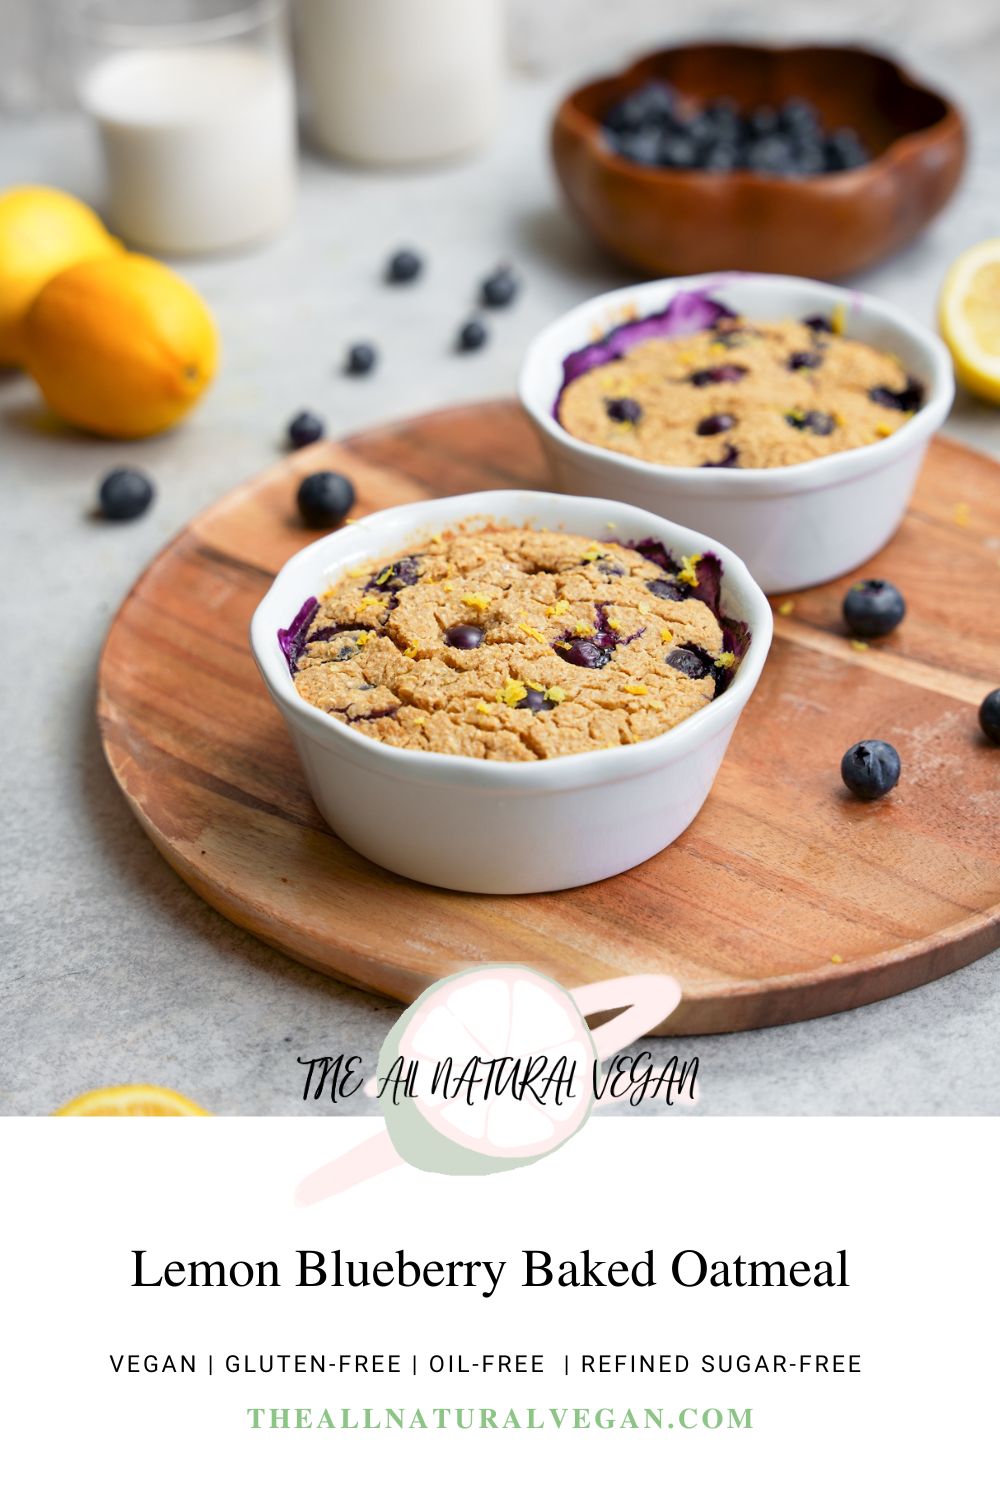 lemon blueberry baked oatmeal recipe card stating this recipe is oil-free, gluten-free, vegan, and refined sugar-free